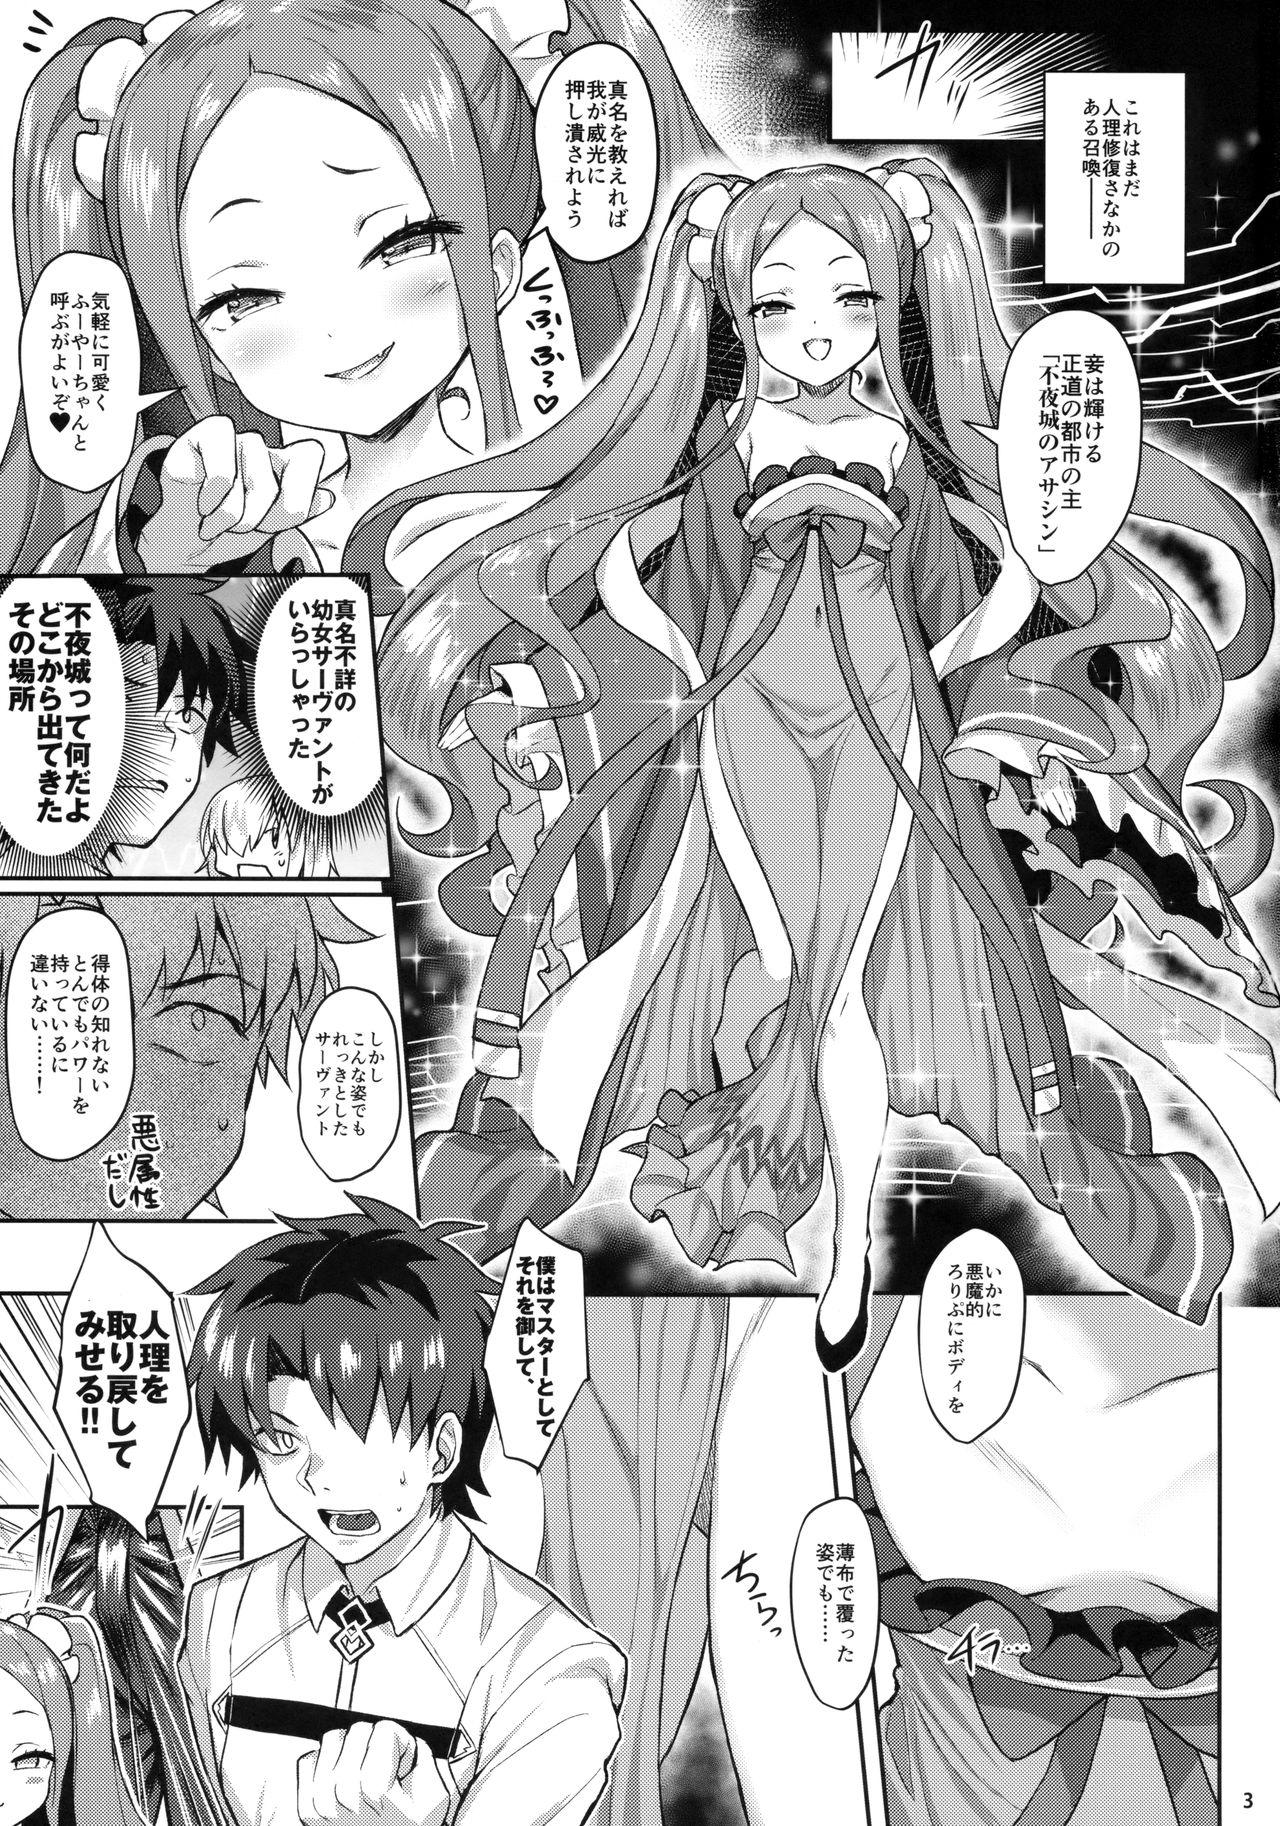 Perfect Body Fuya Syndrome - Sleepless Syndrome - Fate grand order Lesbos - Page 2